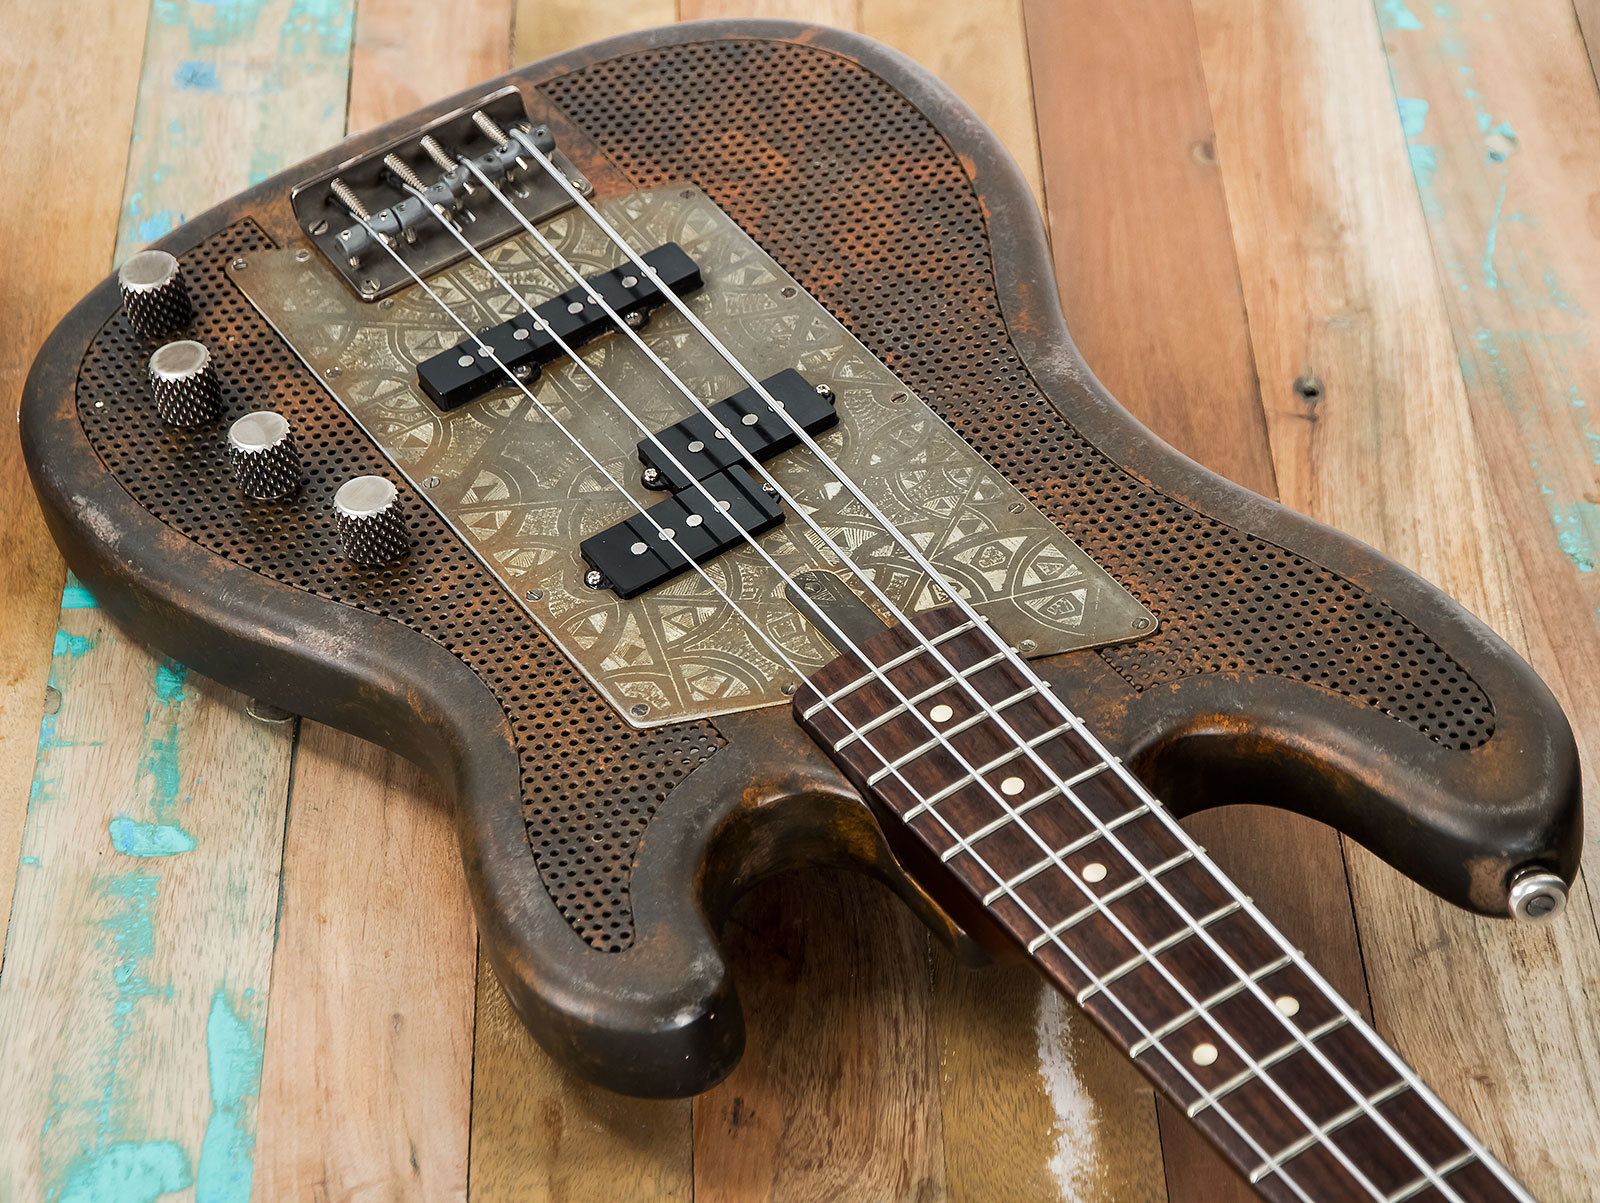 James Trussart Steelcaster Bass Perforated Active Pf #19045 - Rust O Matic African Engraved - Solid body elektrische bas - Variation 2